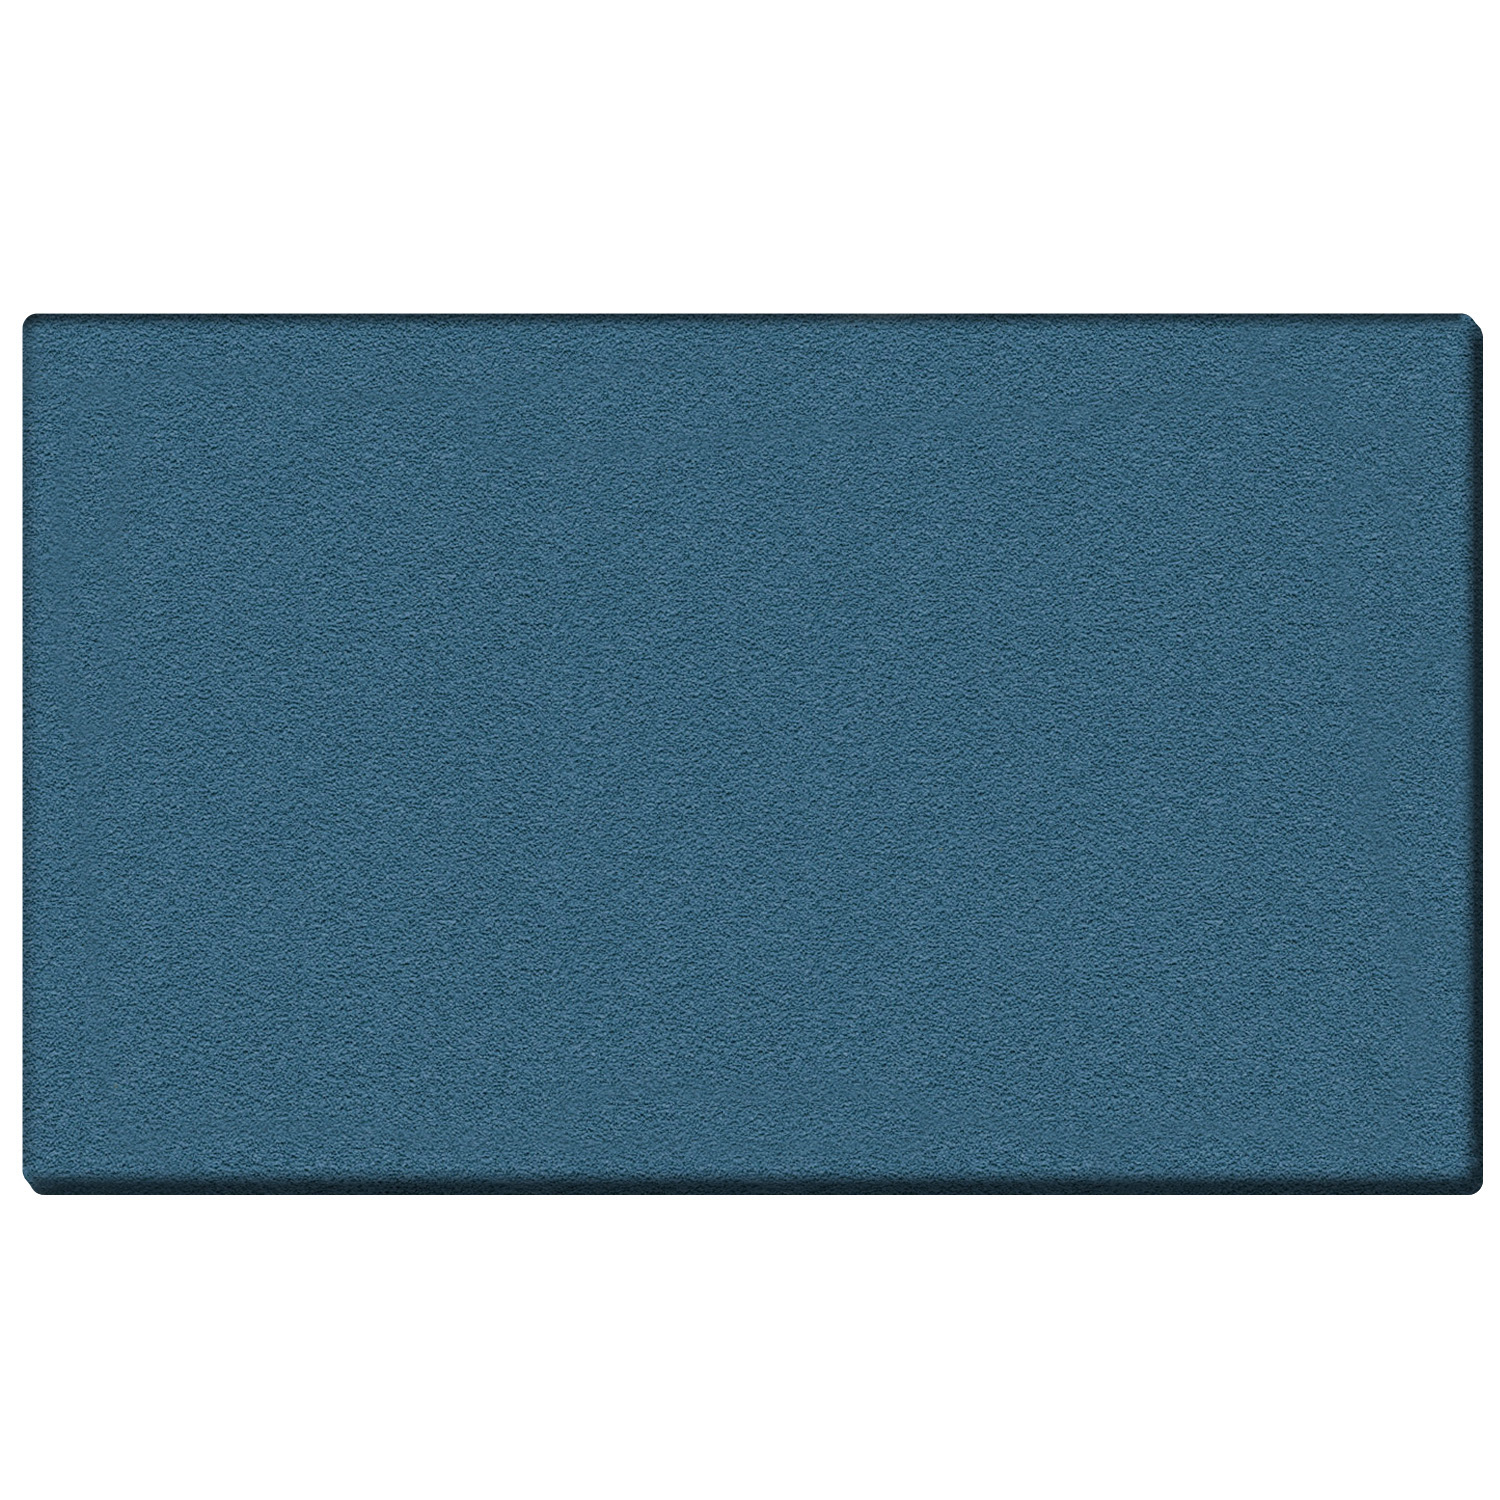 Picture of Ghent 12UV412-W191 Vinyl Tackboard - Wrapped Edge - Ocean